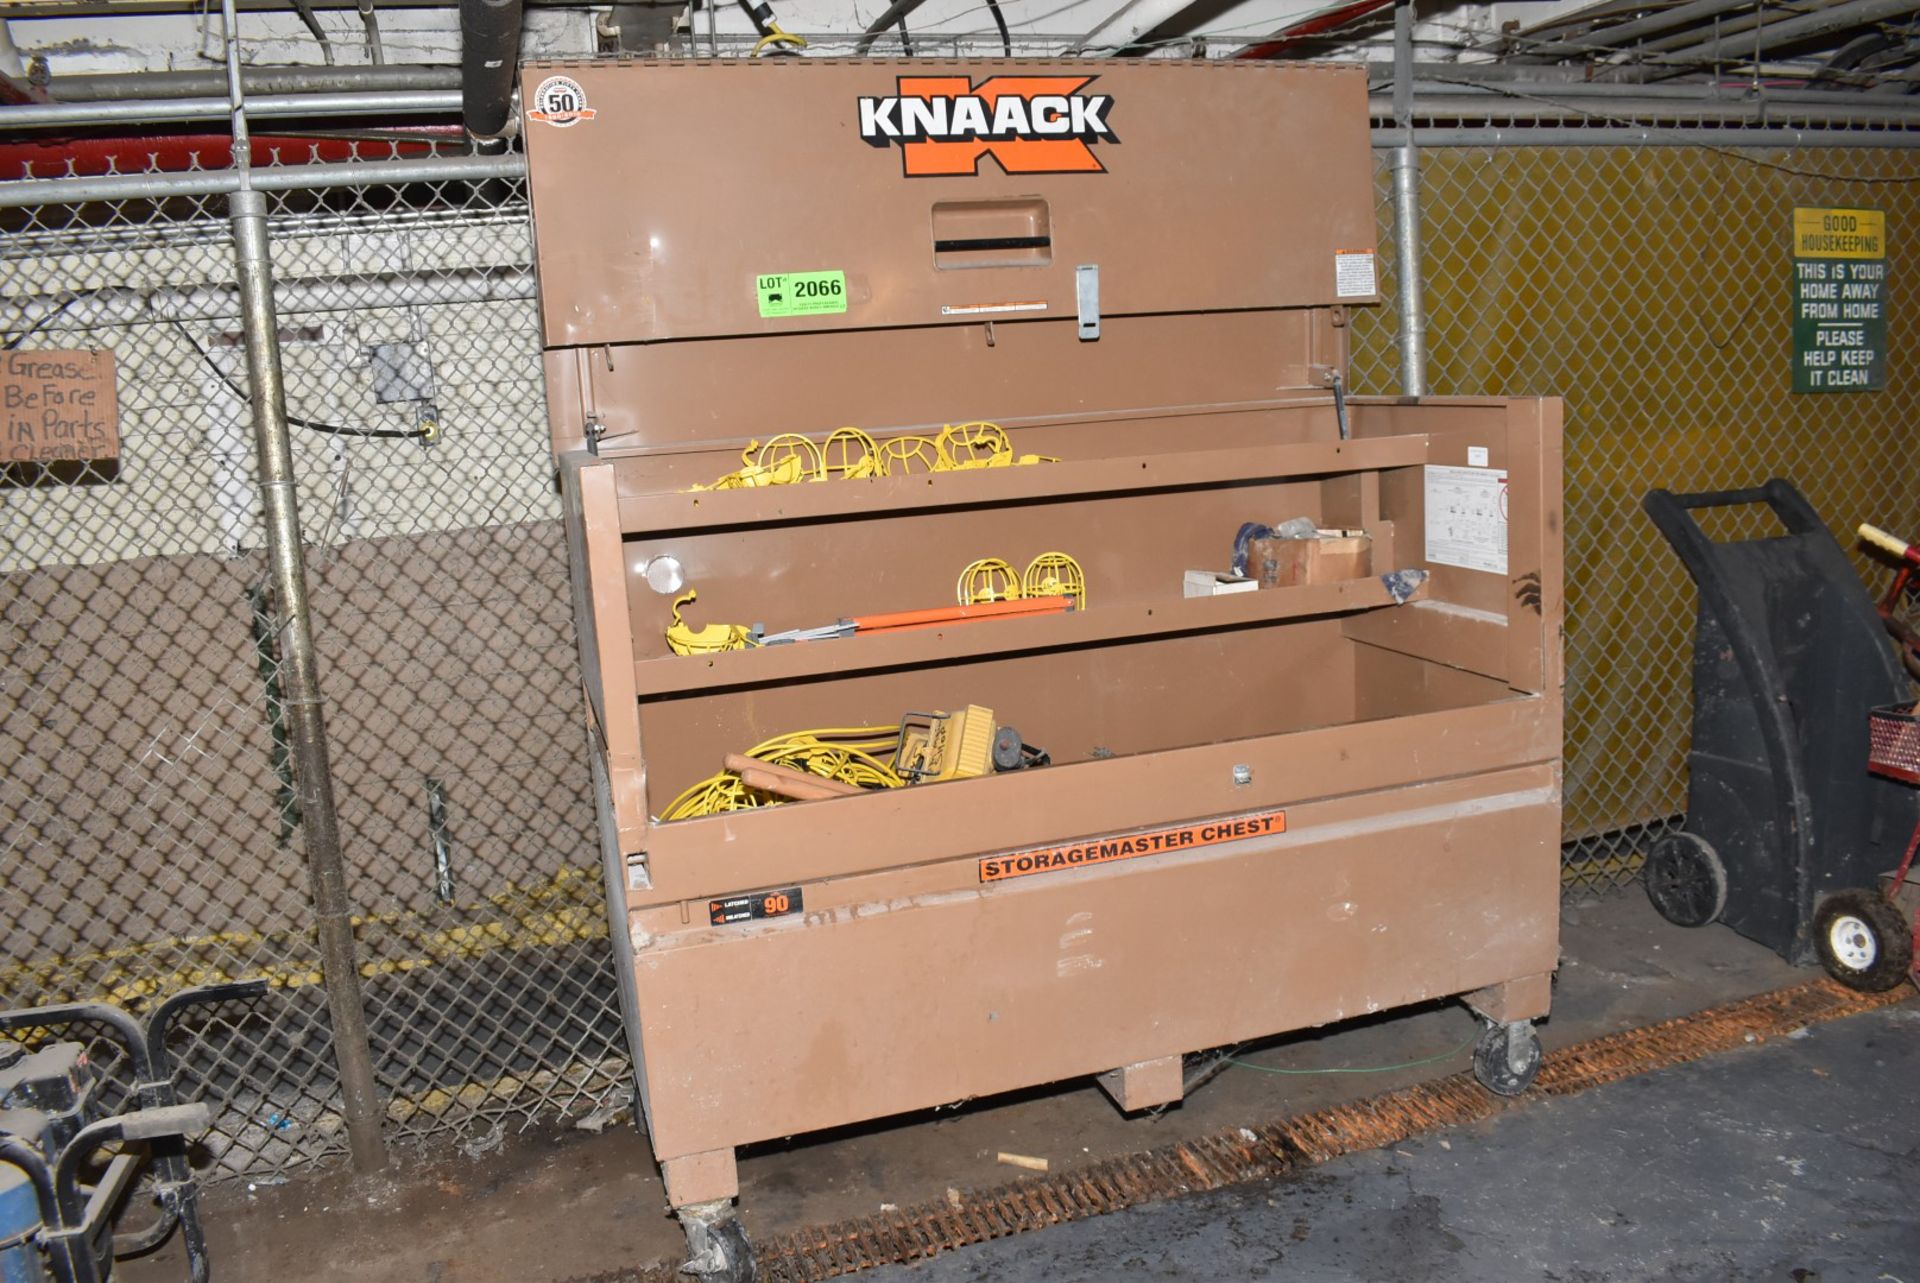 KNAACK ROLLING GANG BOX WITH CONTENTS [RIGGING FEES FOR LOT #2066 - $25 USD PLUS APPLICABLE TAXES]